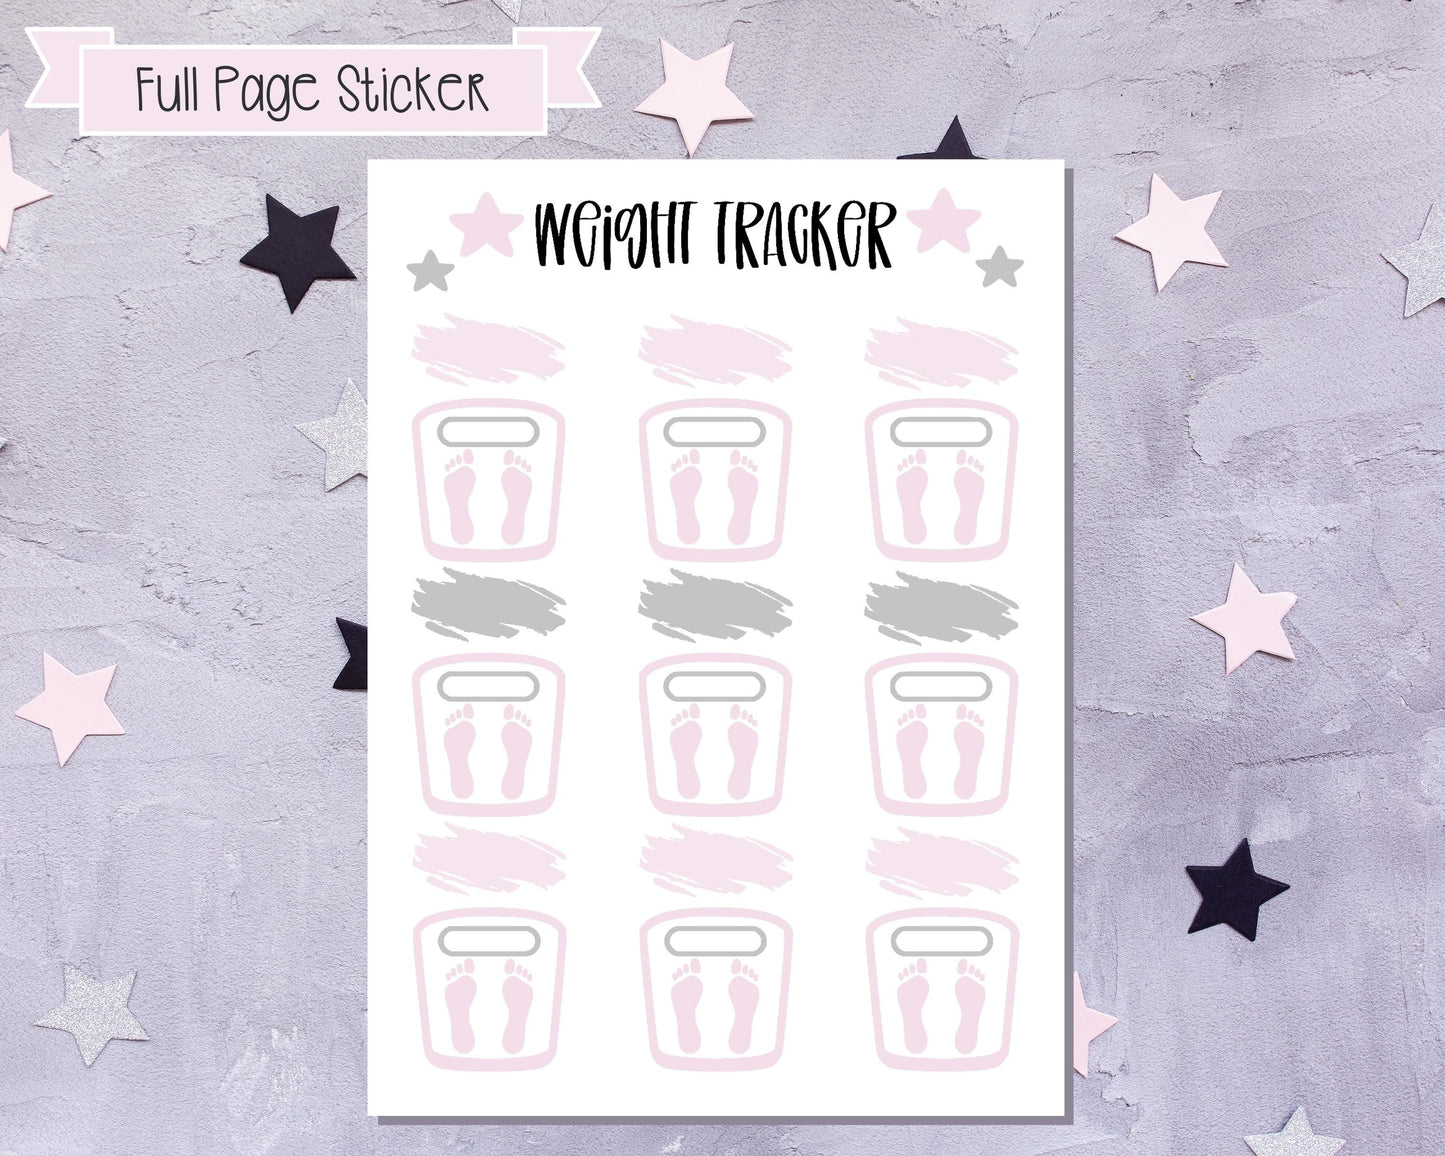 Full Page Sticker, Weight Loss Stickers, Planner Stickers, Diet Stickers, Note Page Stickers, Weight Tracker Stickers, Health Stickers